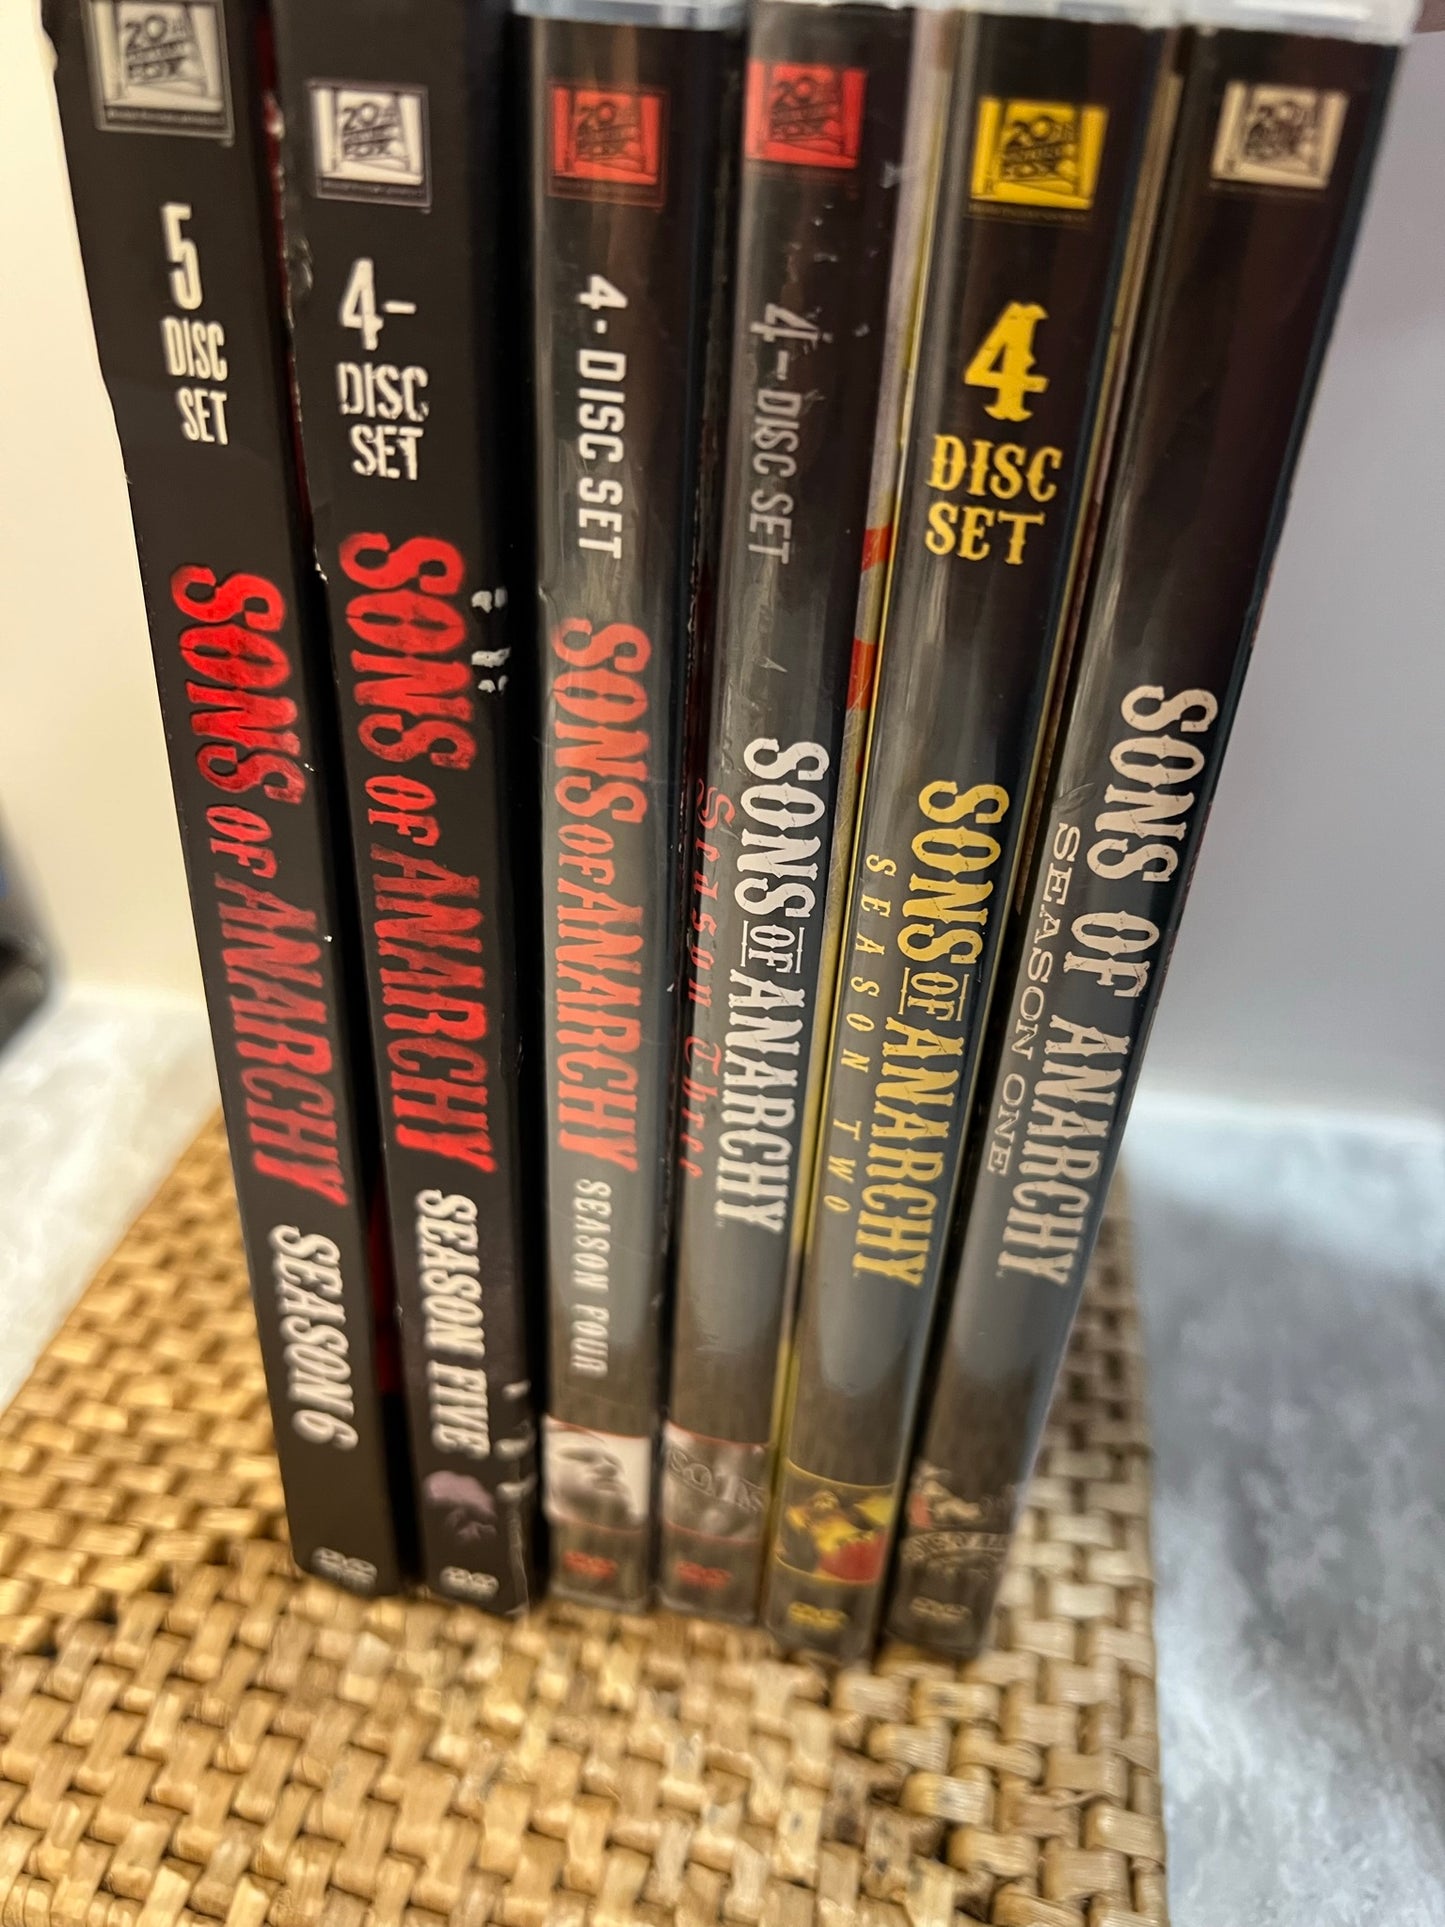 Sons of Anarchy Seasons 1-6 DVD Sets